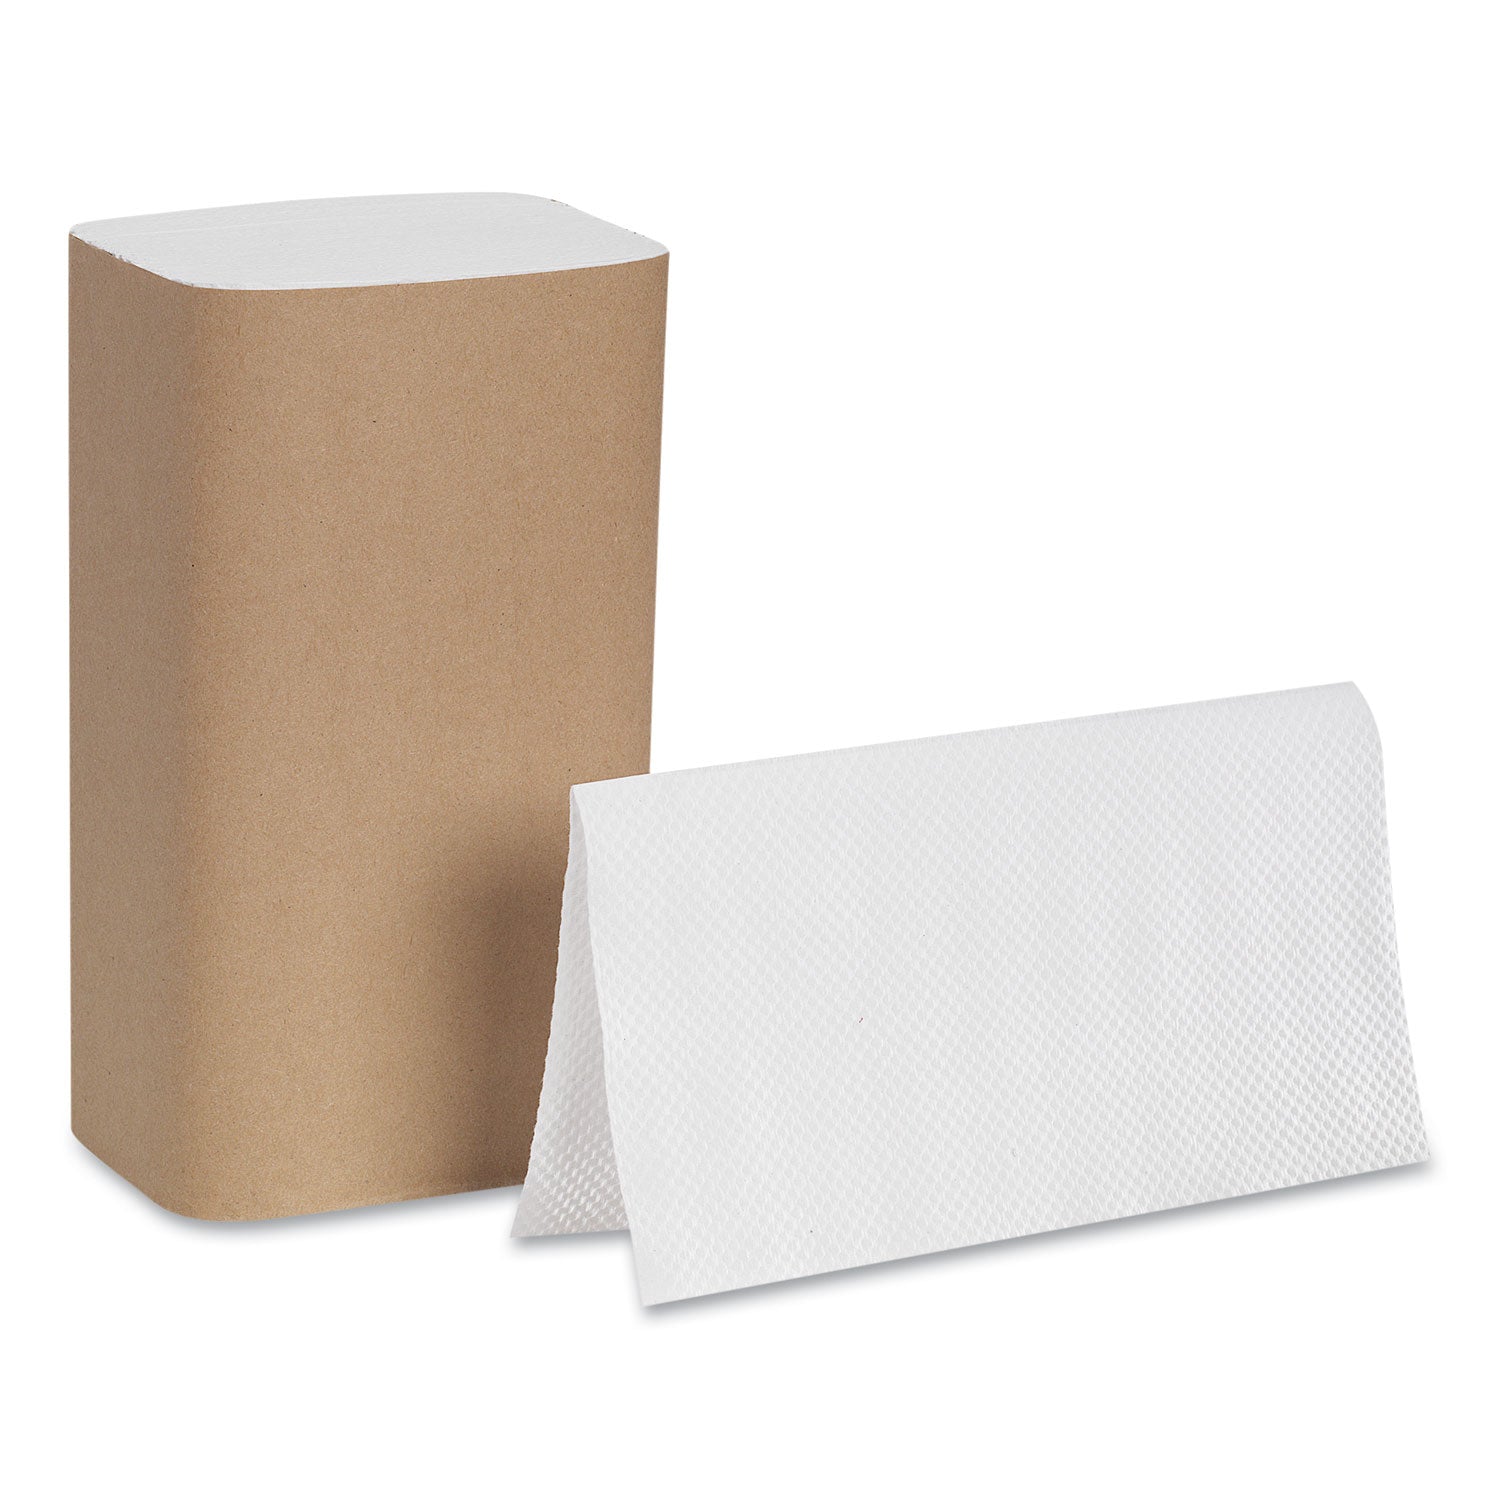 Pacific Blue Basic S-Fold Paper Towels, 1-Ply, 10.25 x 9.25, White, 250/Pack, 16 Packs/Carton - 